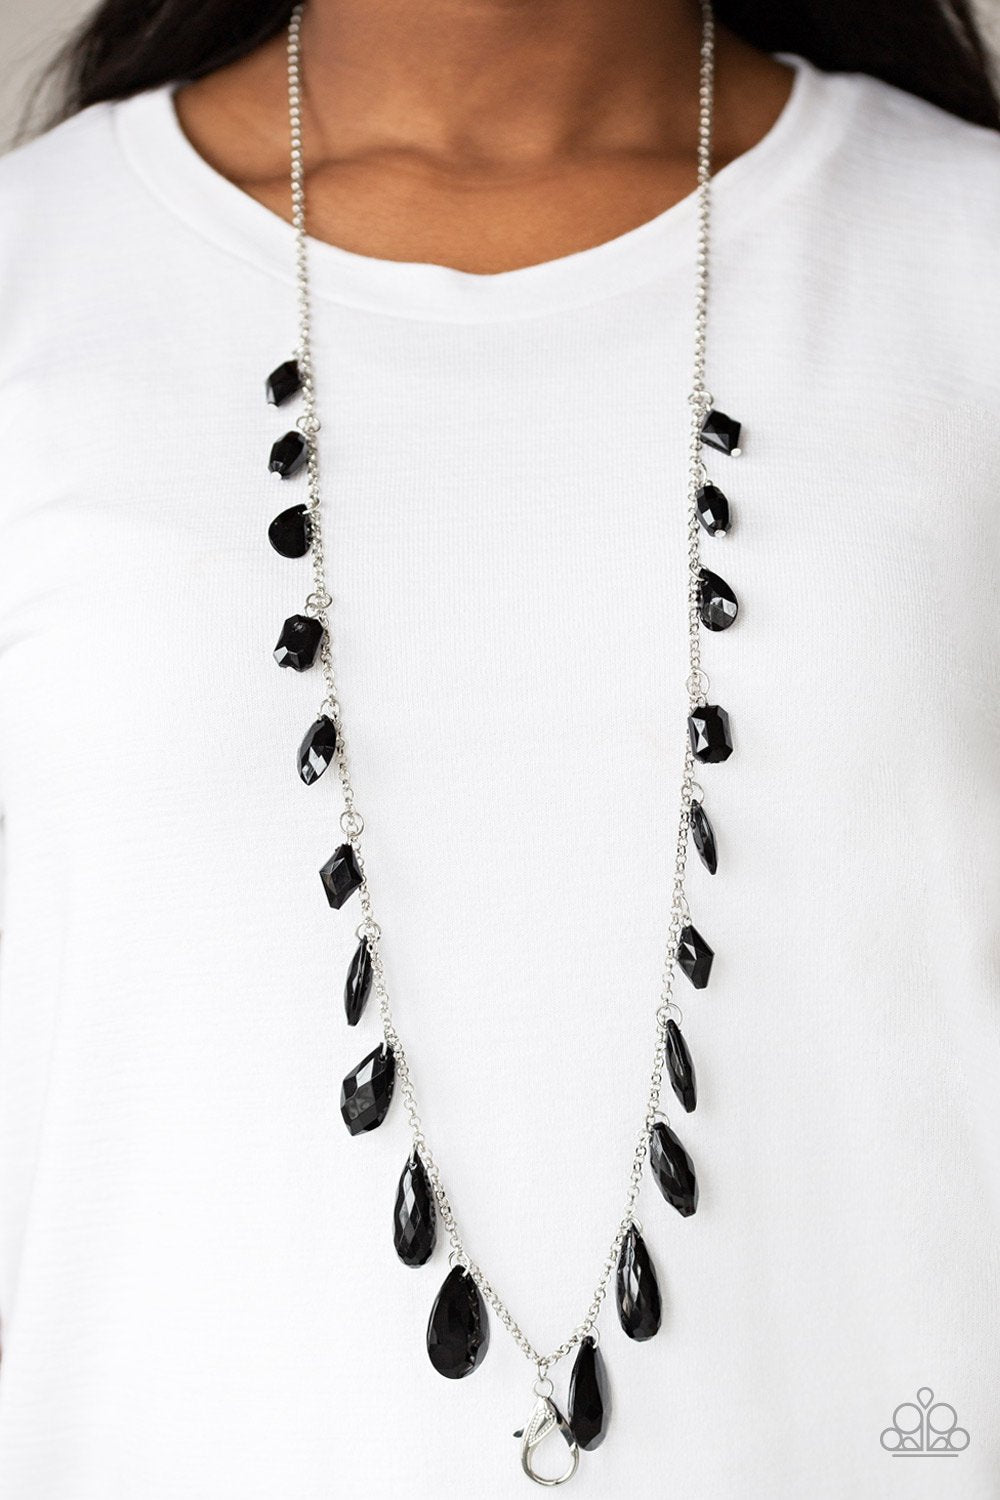 GLOW and Steady Wins the Race-black LANYARD-Paparazzi necklace